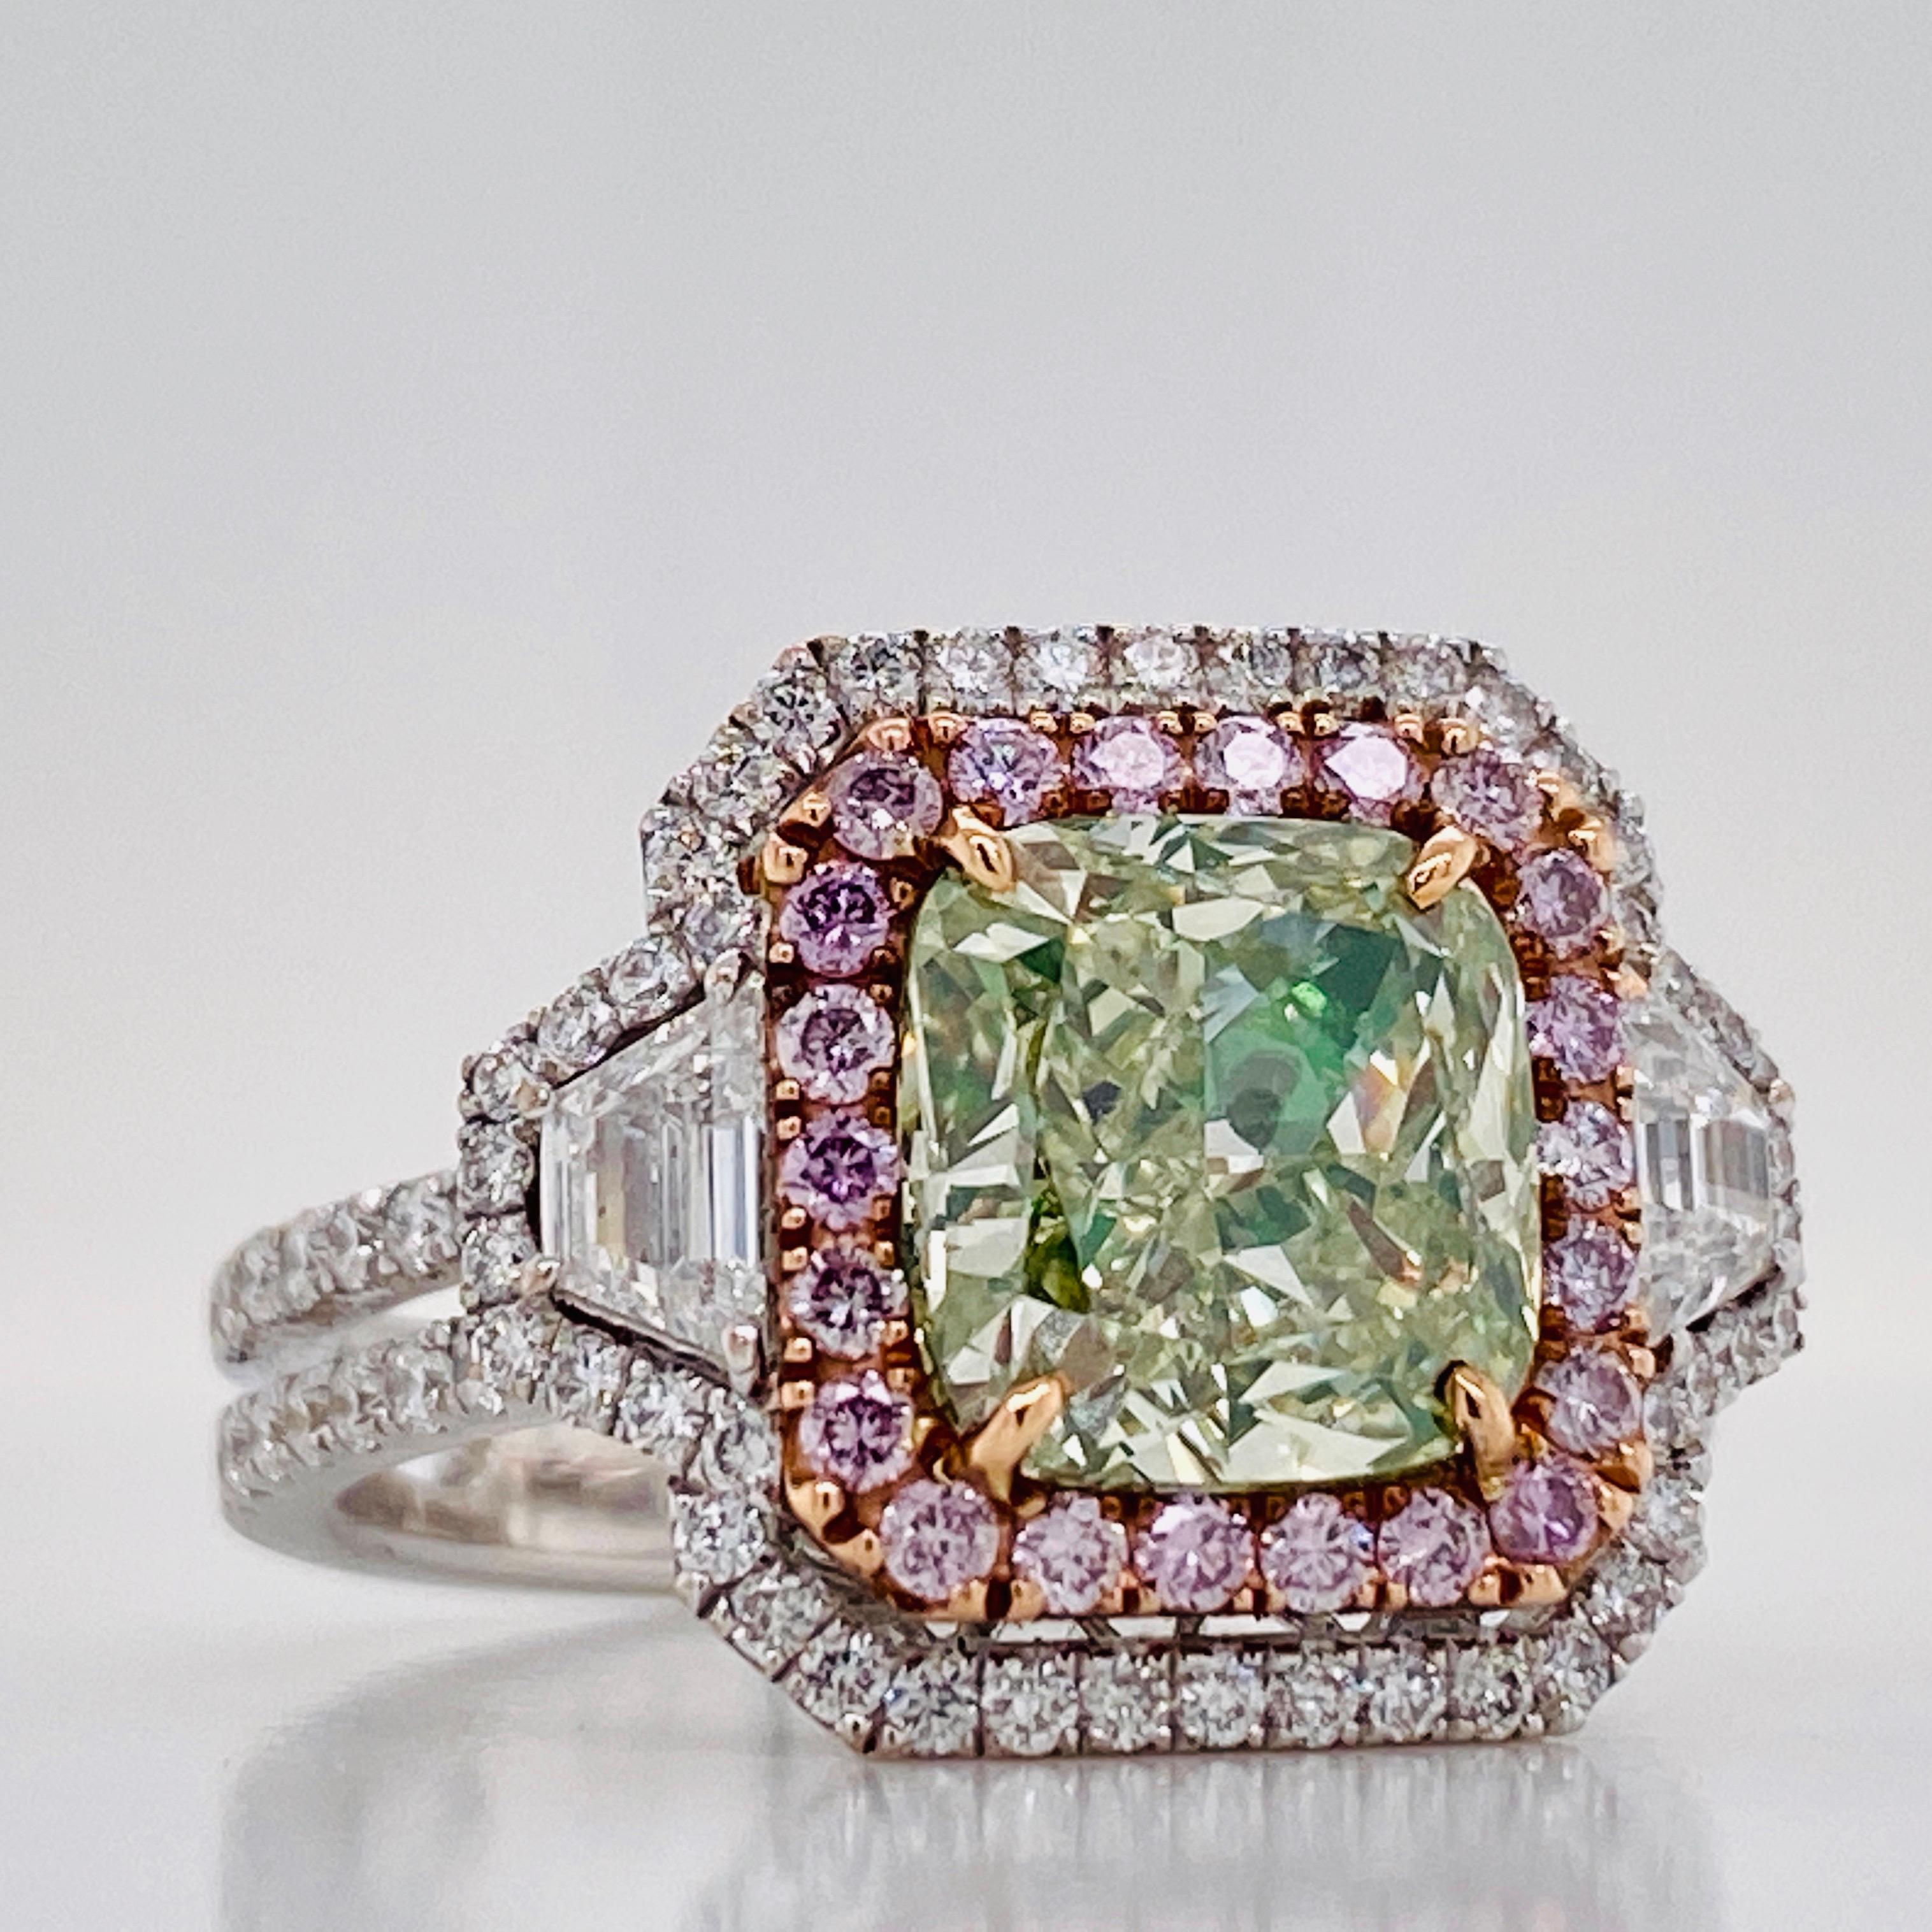 From the Emilio Jewelry Vault, Showcasing a magnificent 3.00 carat Gia certified natural fancy yellow green diamond set in the center. In addition the mounting consists of .25ct of pink diamonds, .55ct of round diamonds, .32ct of trapezoids. 
We are